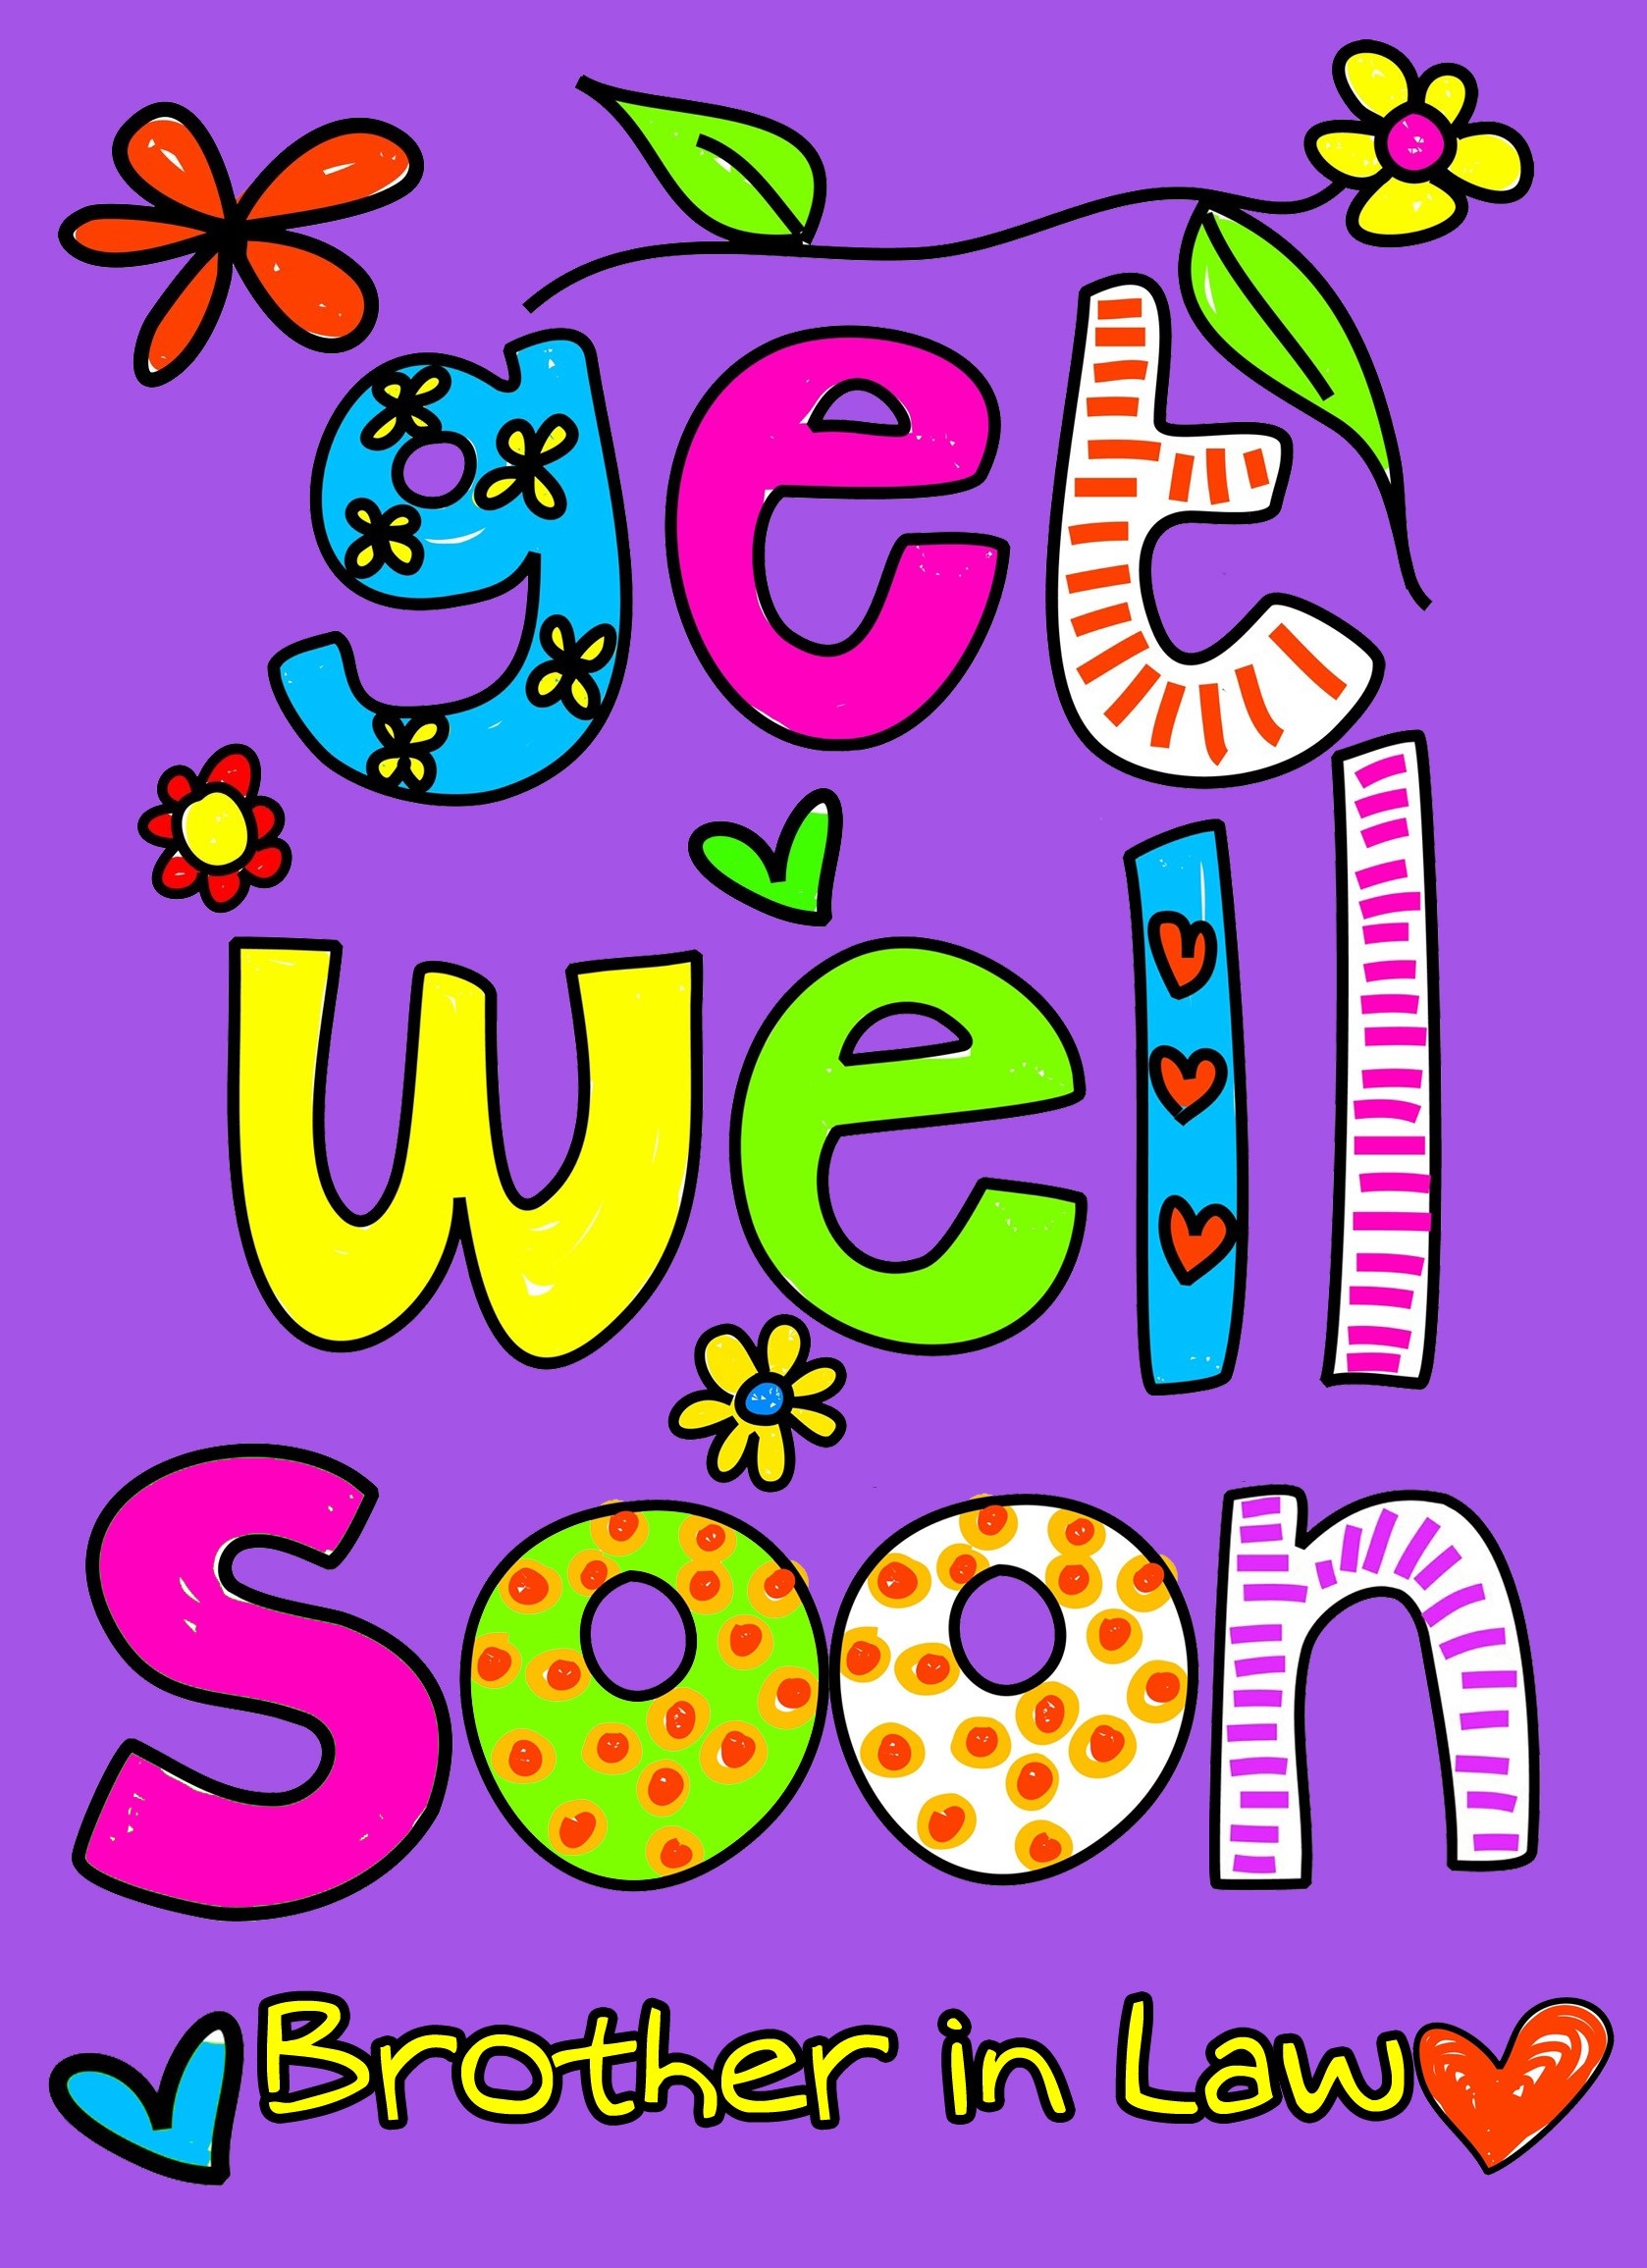 Get Well Soon 'Brother in Law' Greeting Card